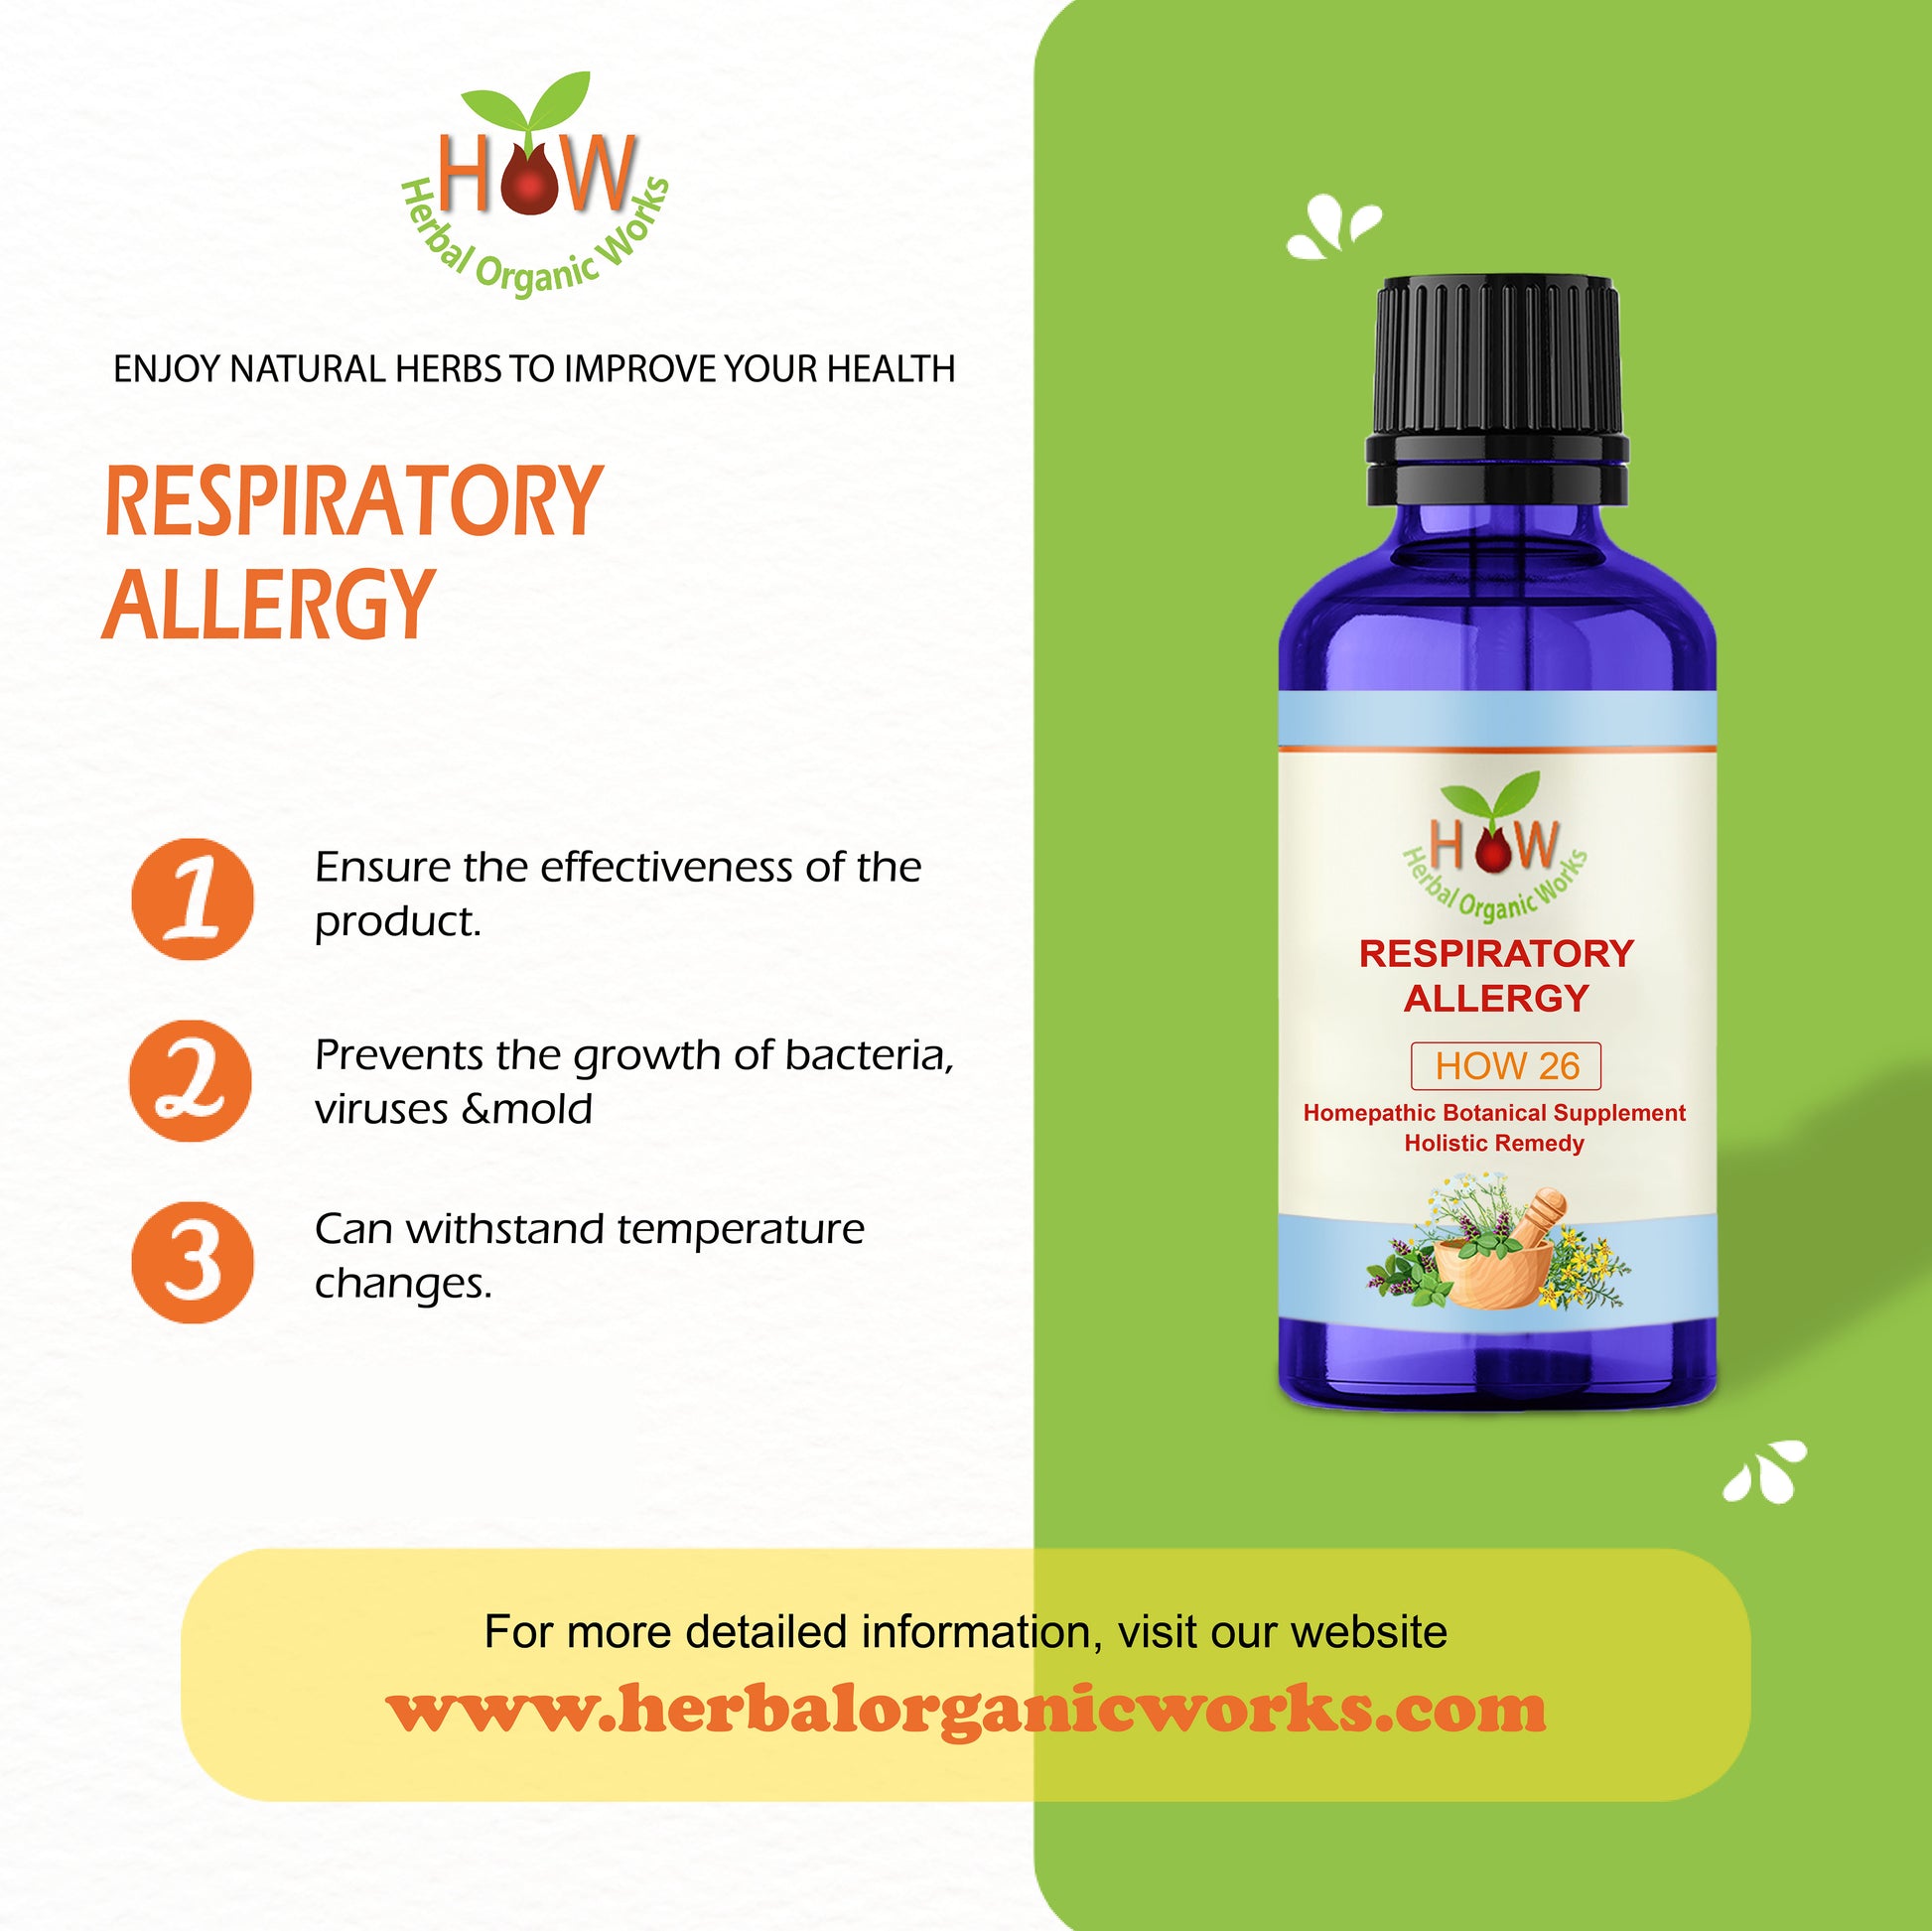 RESPIRATORY ALLERGY NATURAL REMEDY (HOW26)